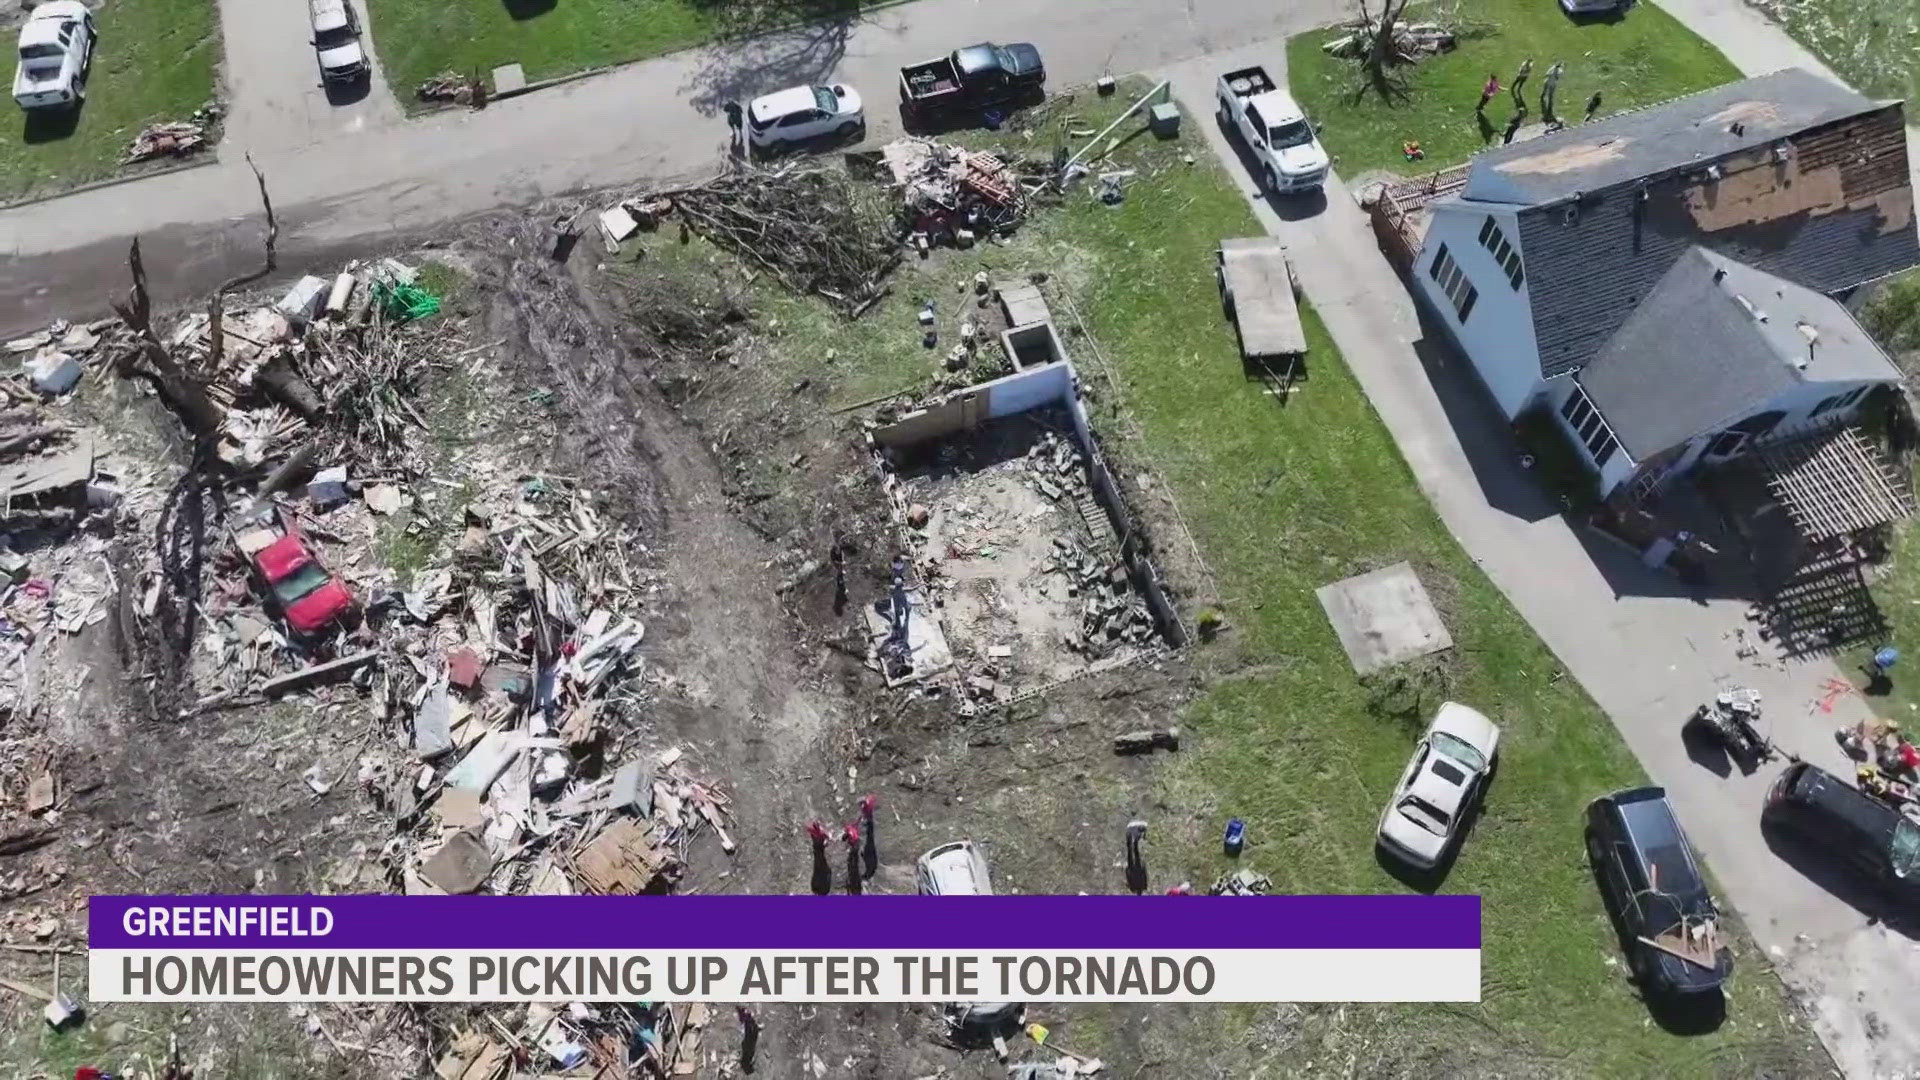 The small community of Greenfield, Iowa, is reeling after an EF-4 tornado came through town, injuring at least 35 people and killing four.